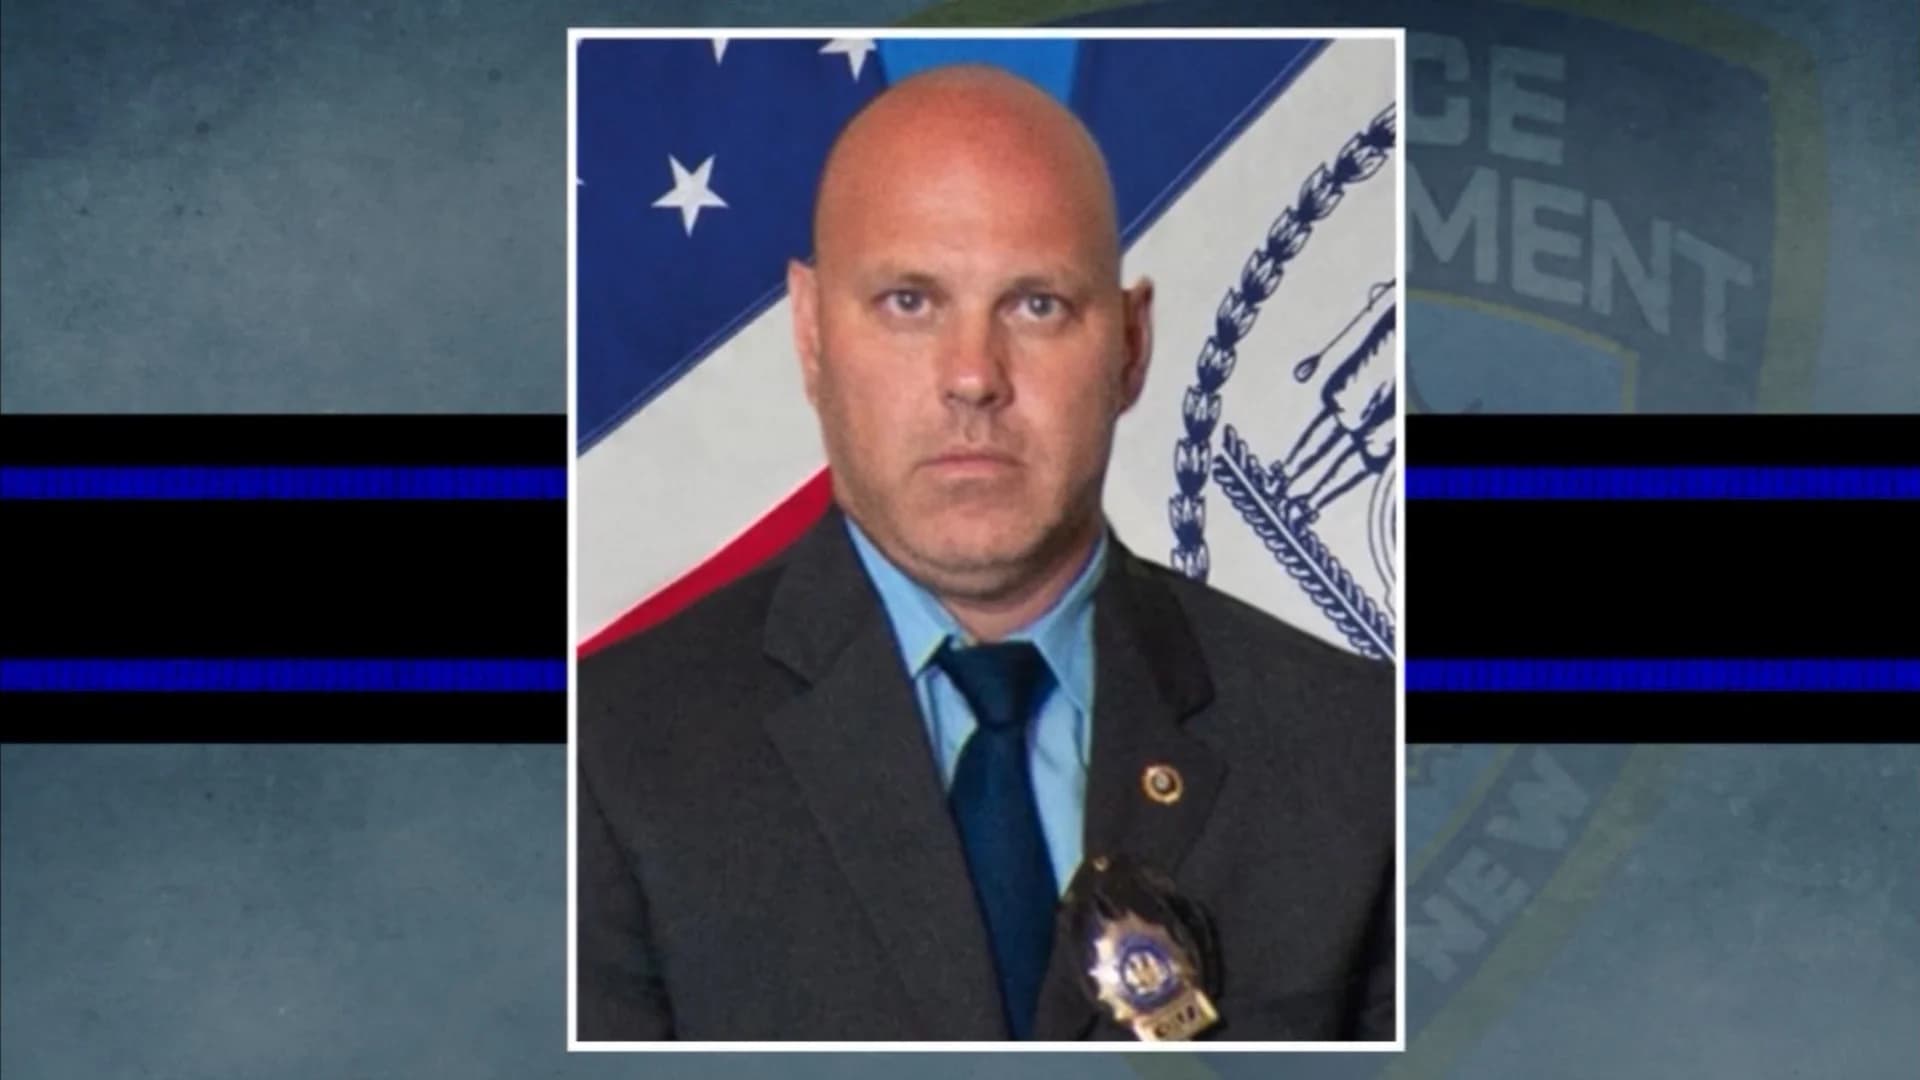 Fallen NYPD detective promoted during funeral Mass